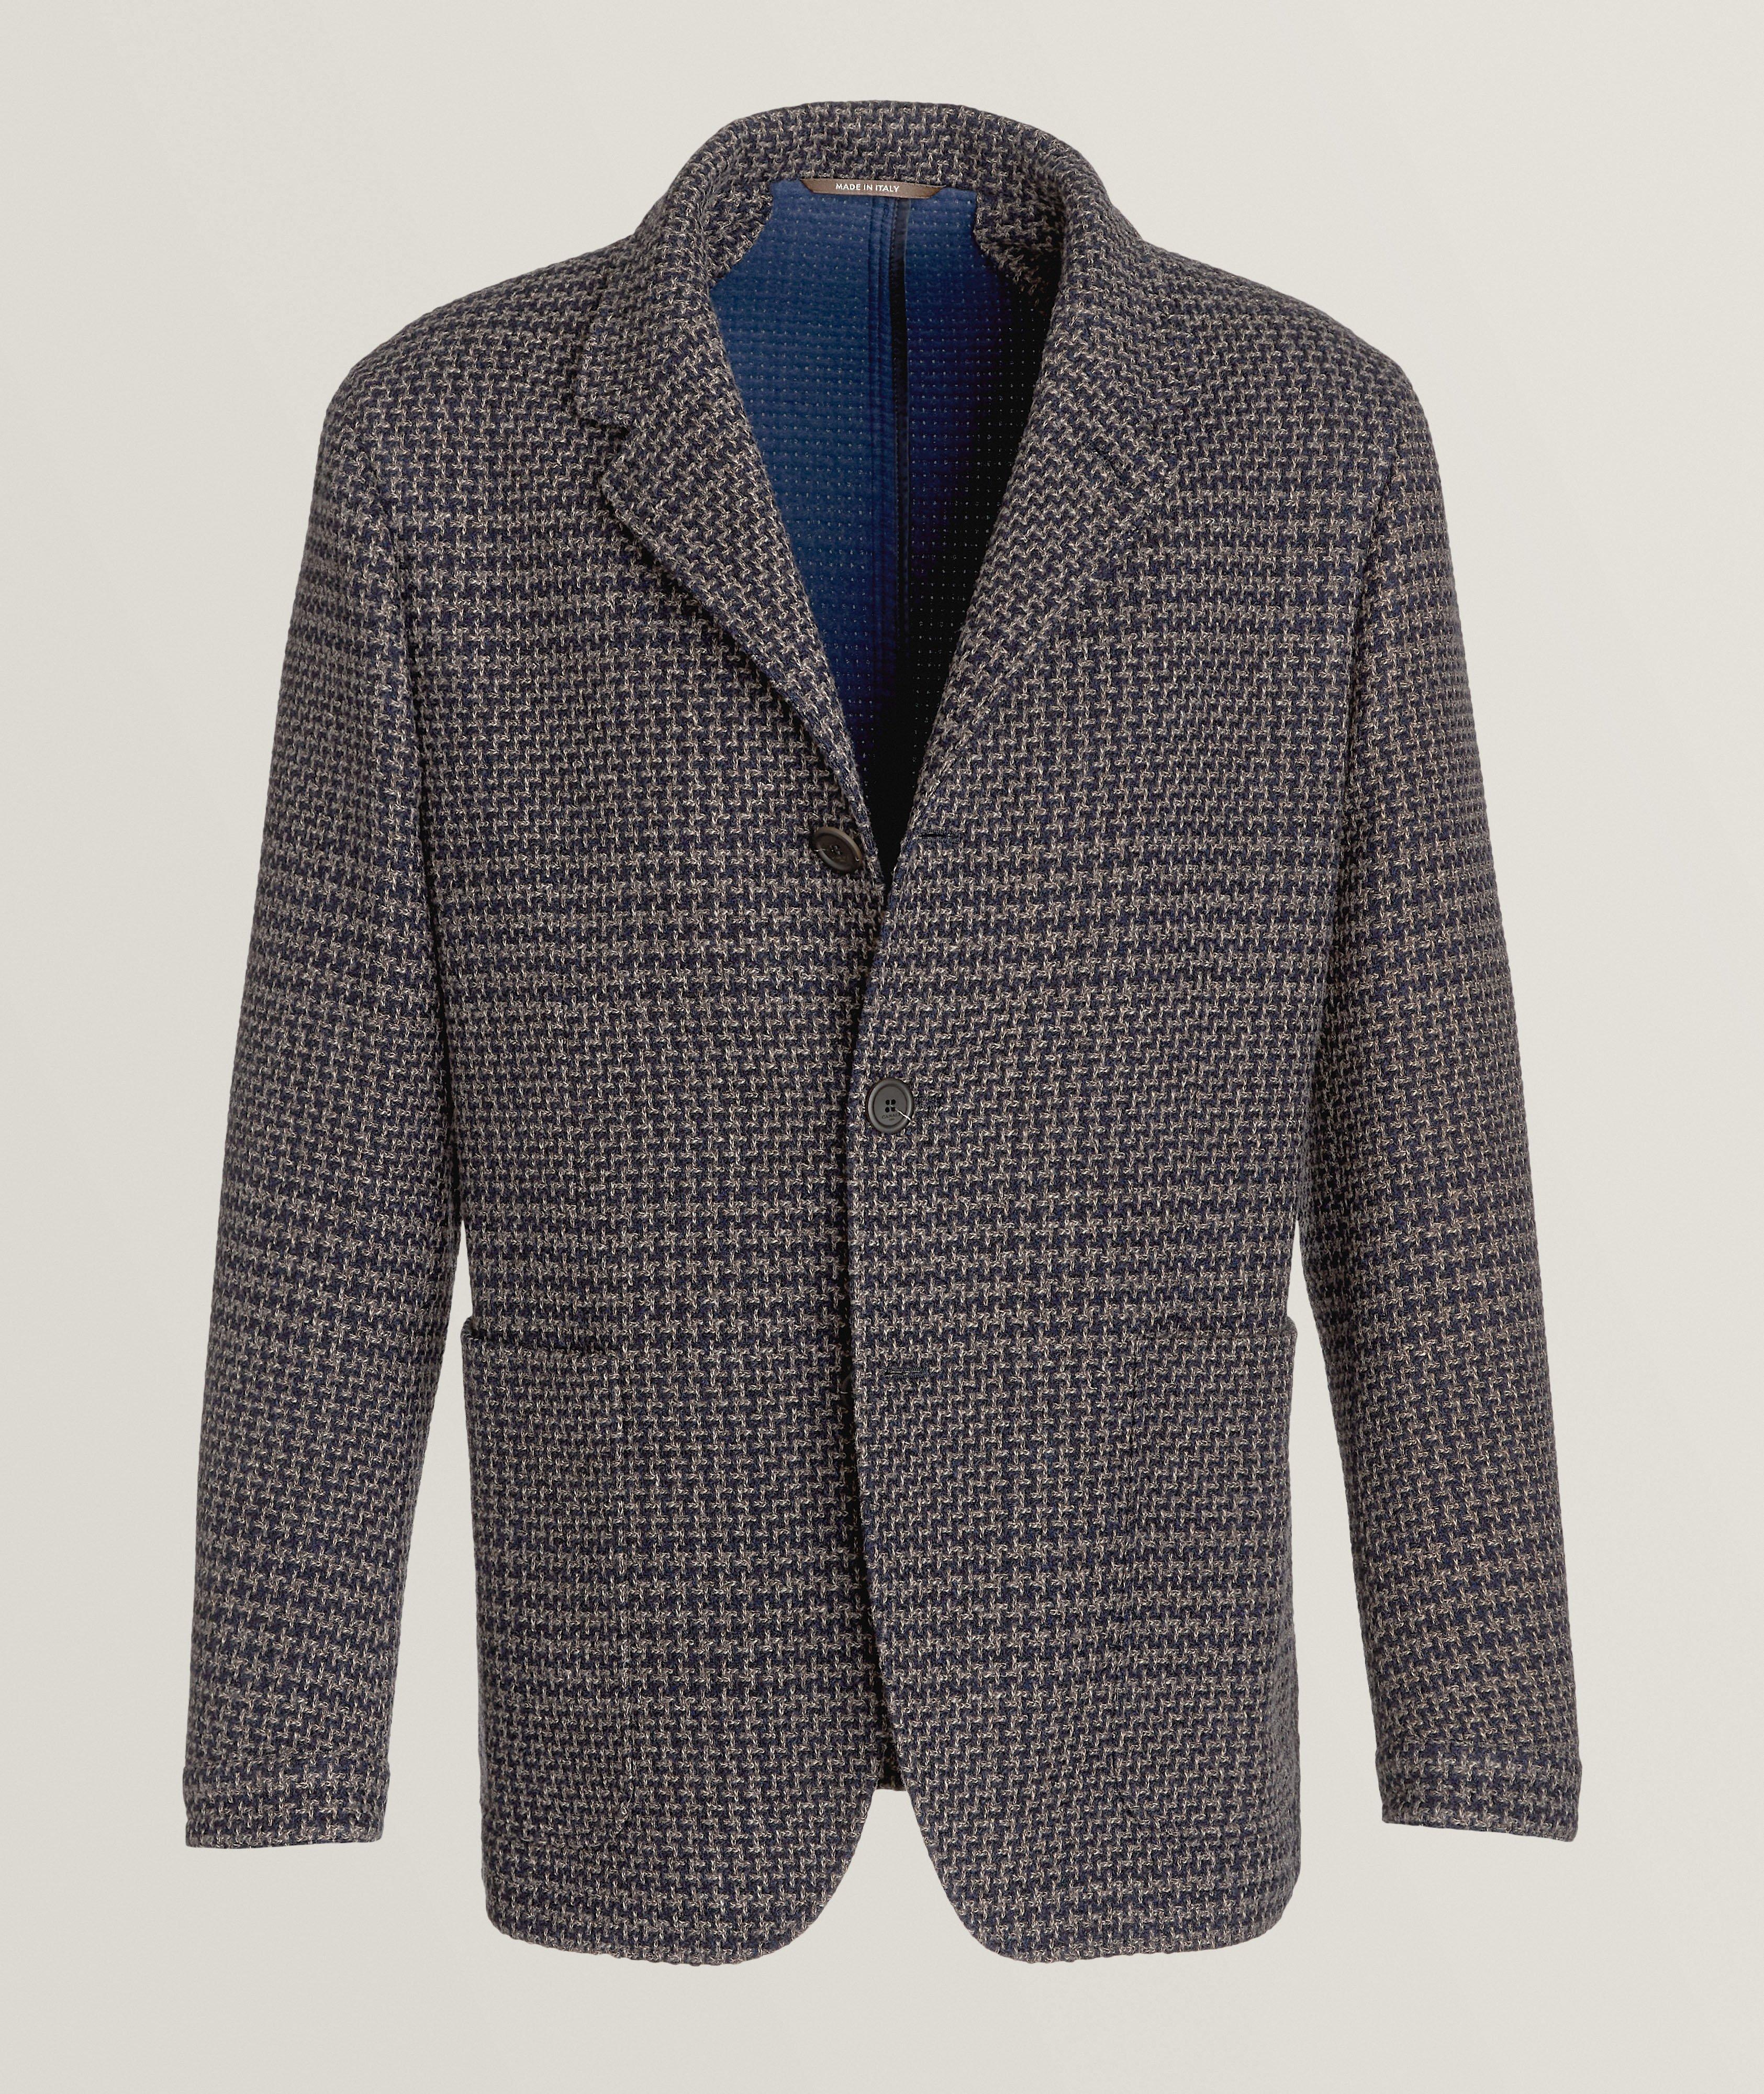 Nuvola Textured Knit Wool-Cashmere Sport Jacket image 0